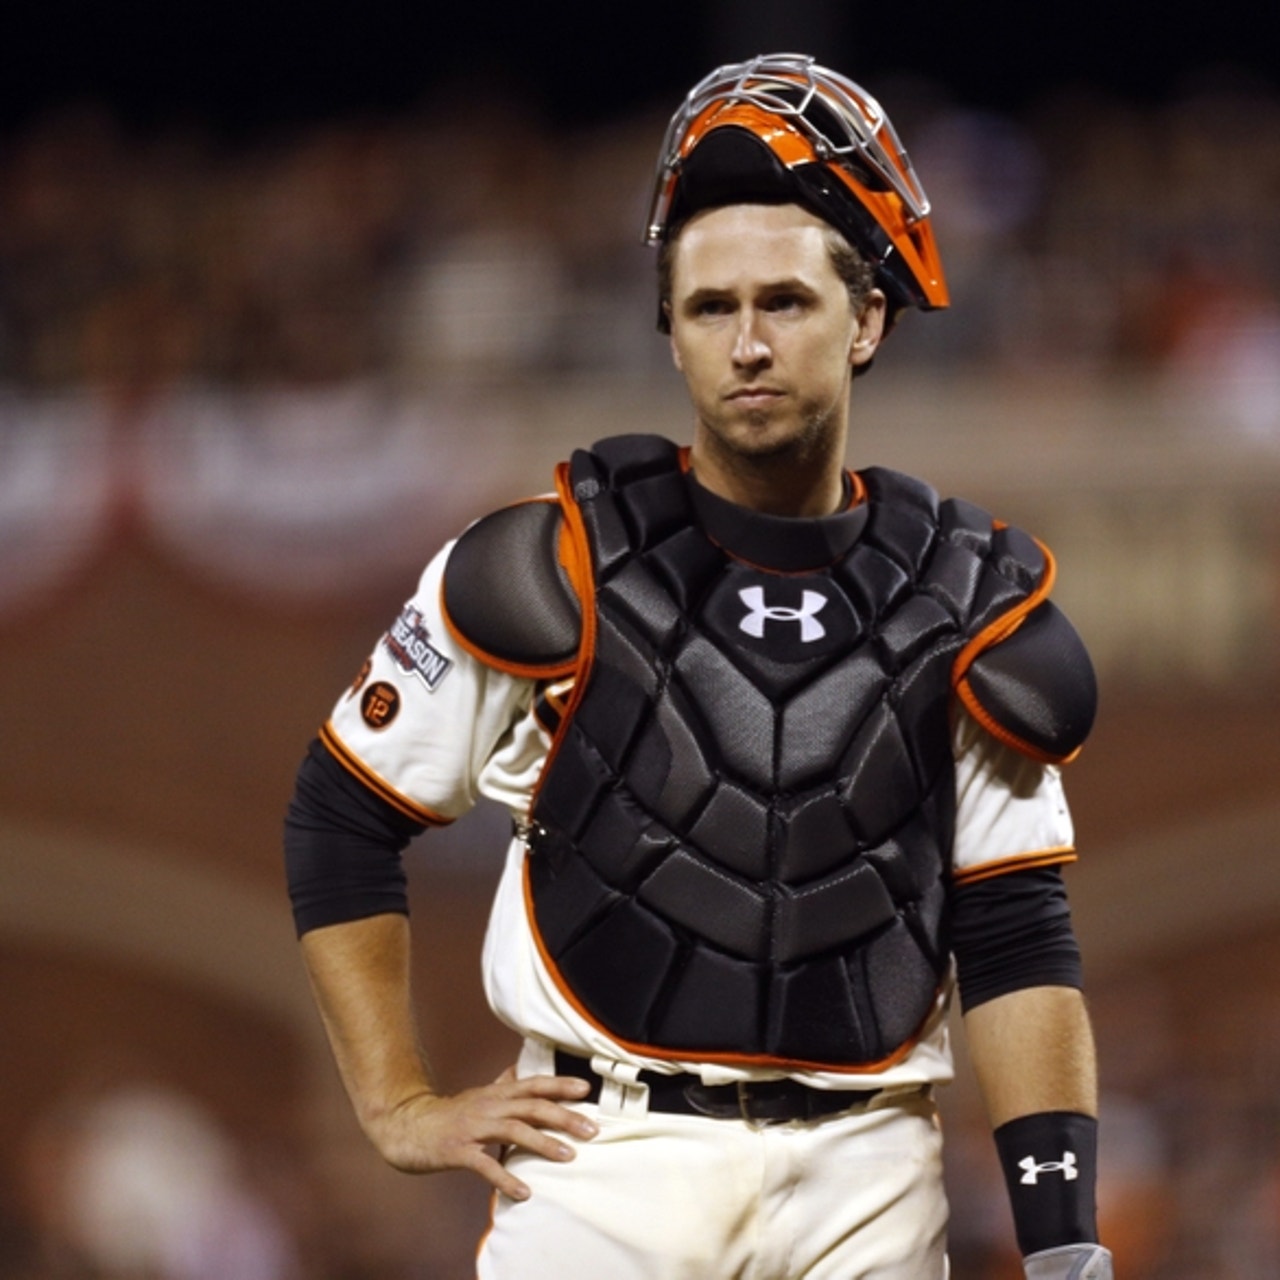 San Francisco Giants: Buster Posey Potential Transition to Third